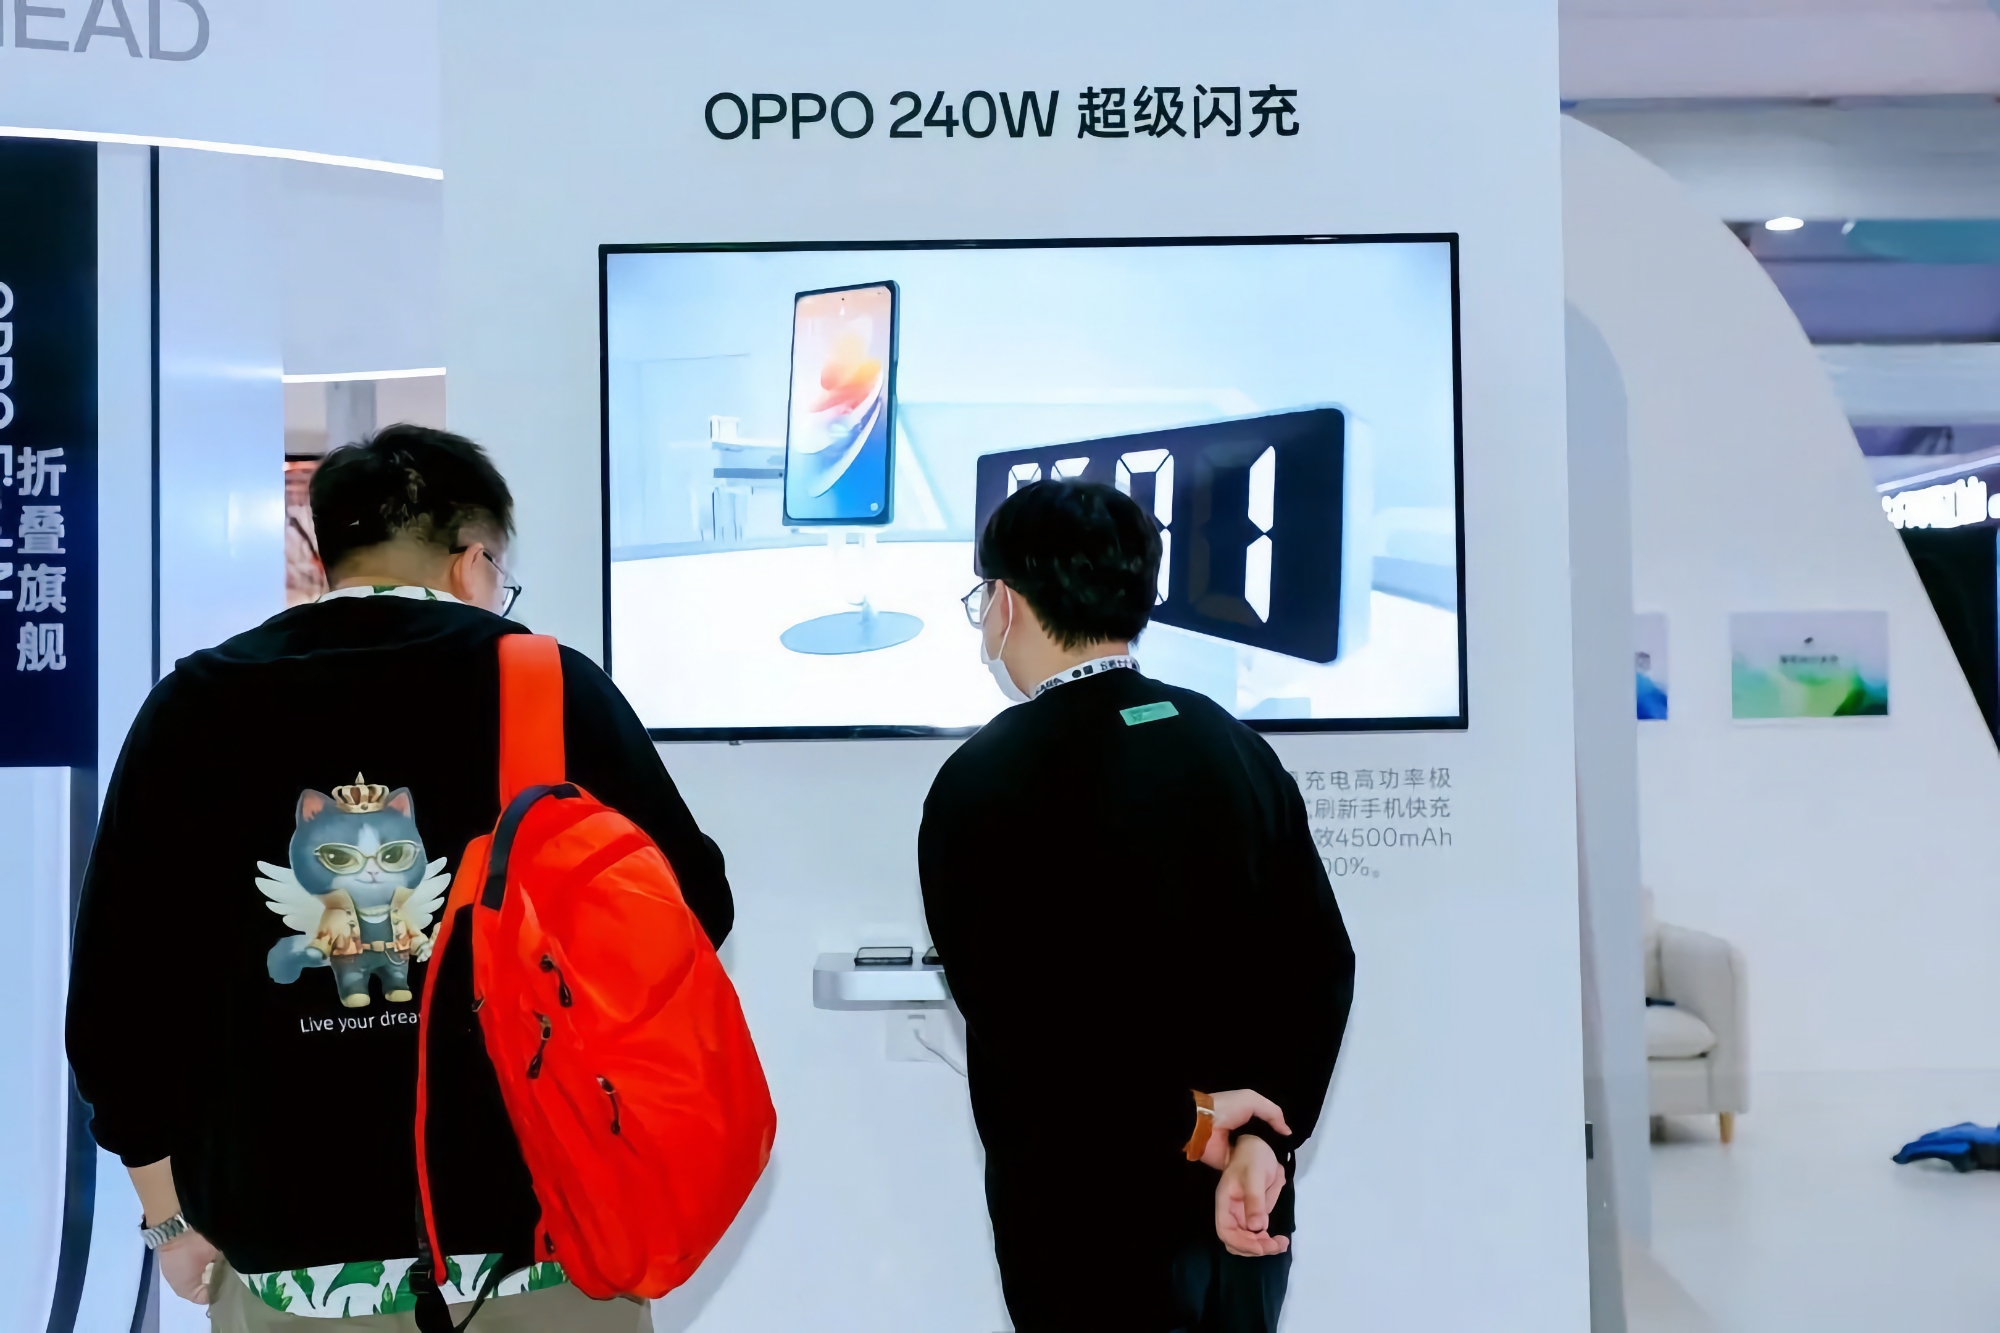 Insider: OPPO plans to introduce 240W smartphone fast charging technology in 2023